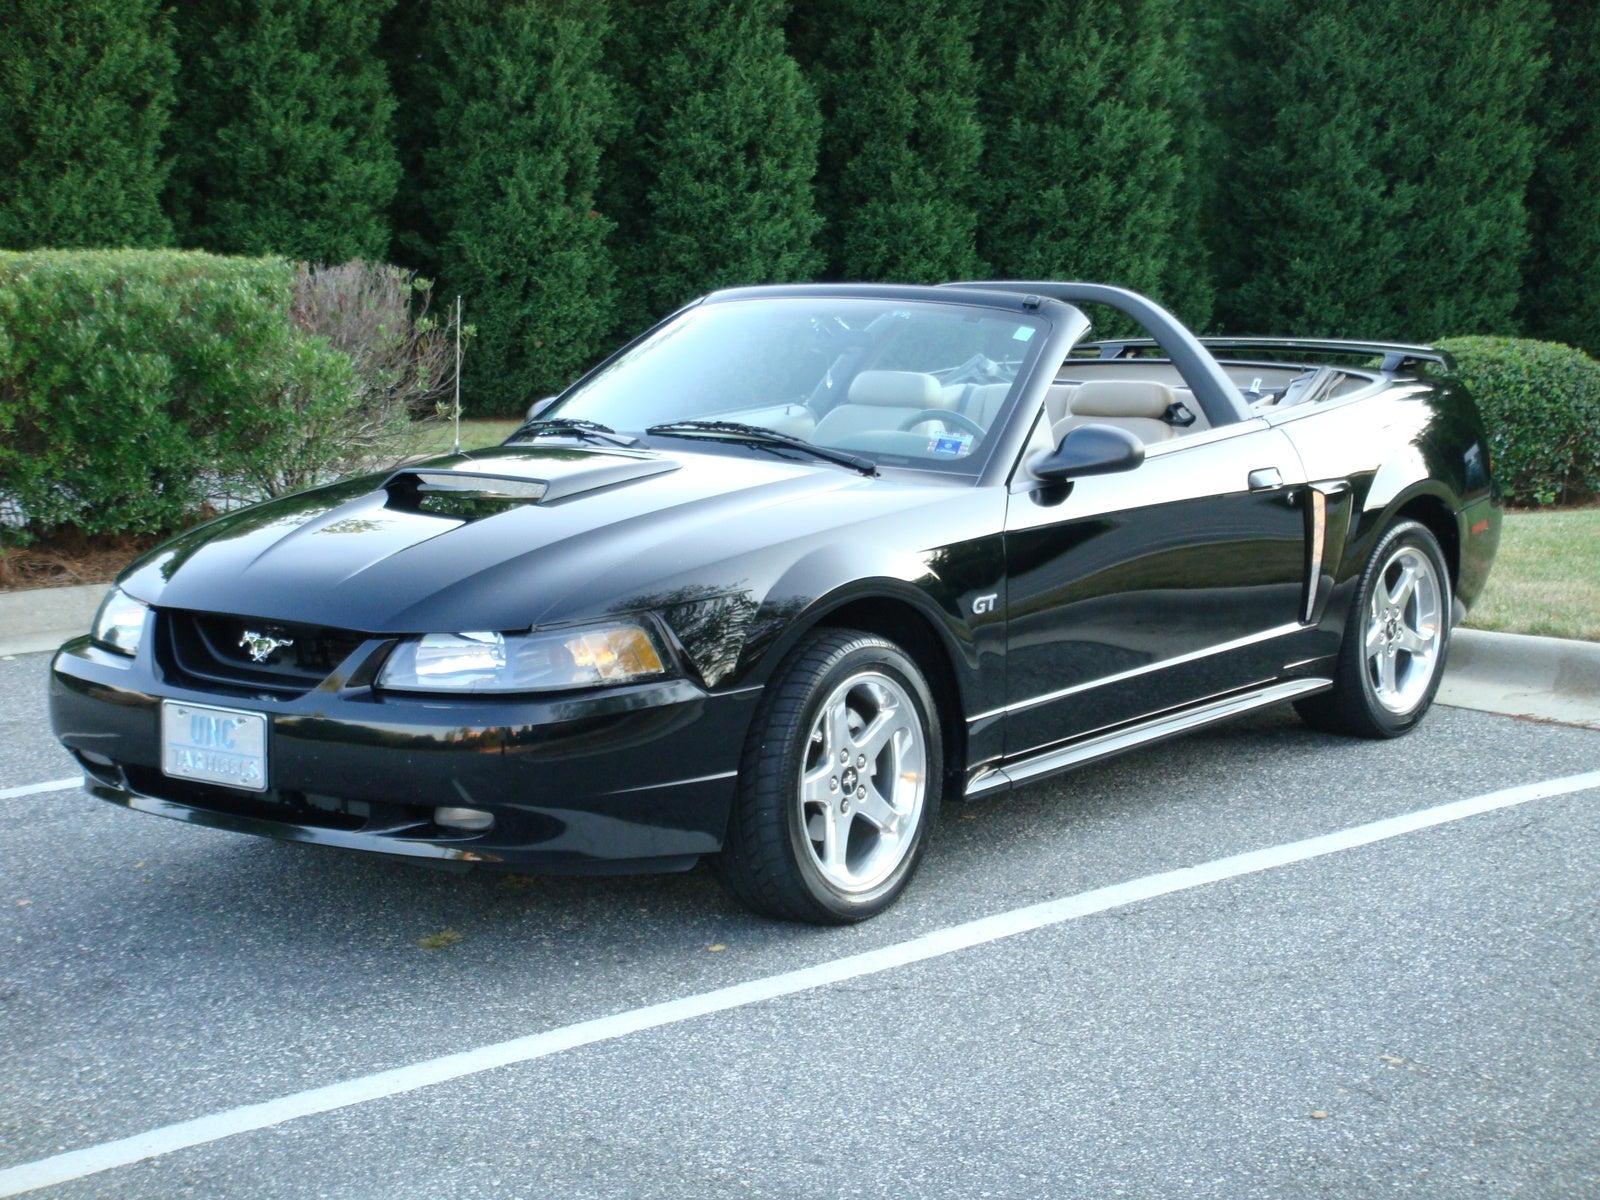 2003 Ford gt mustang specs #10